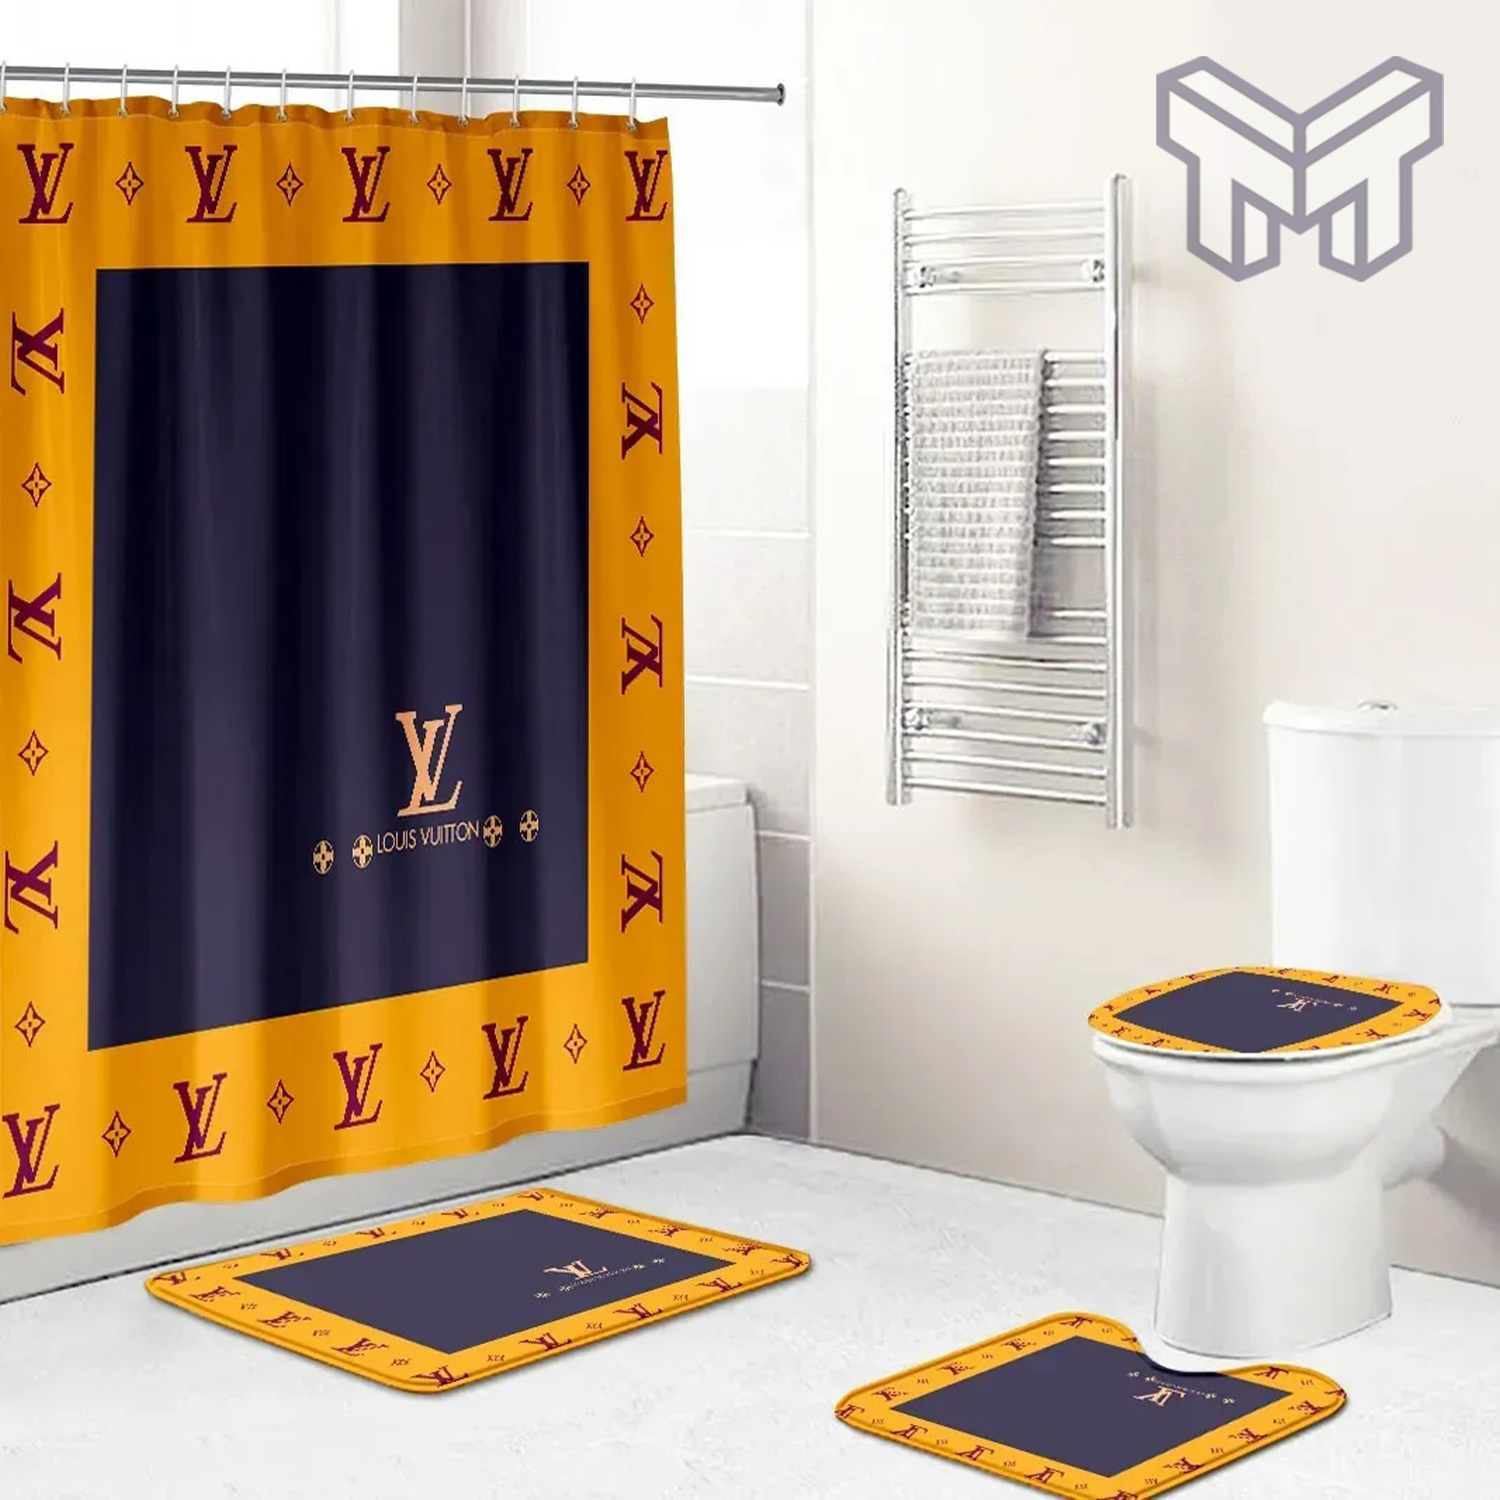 LV toilet seat cover